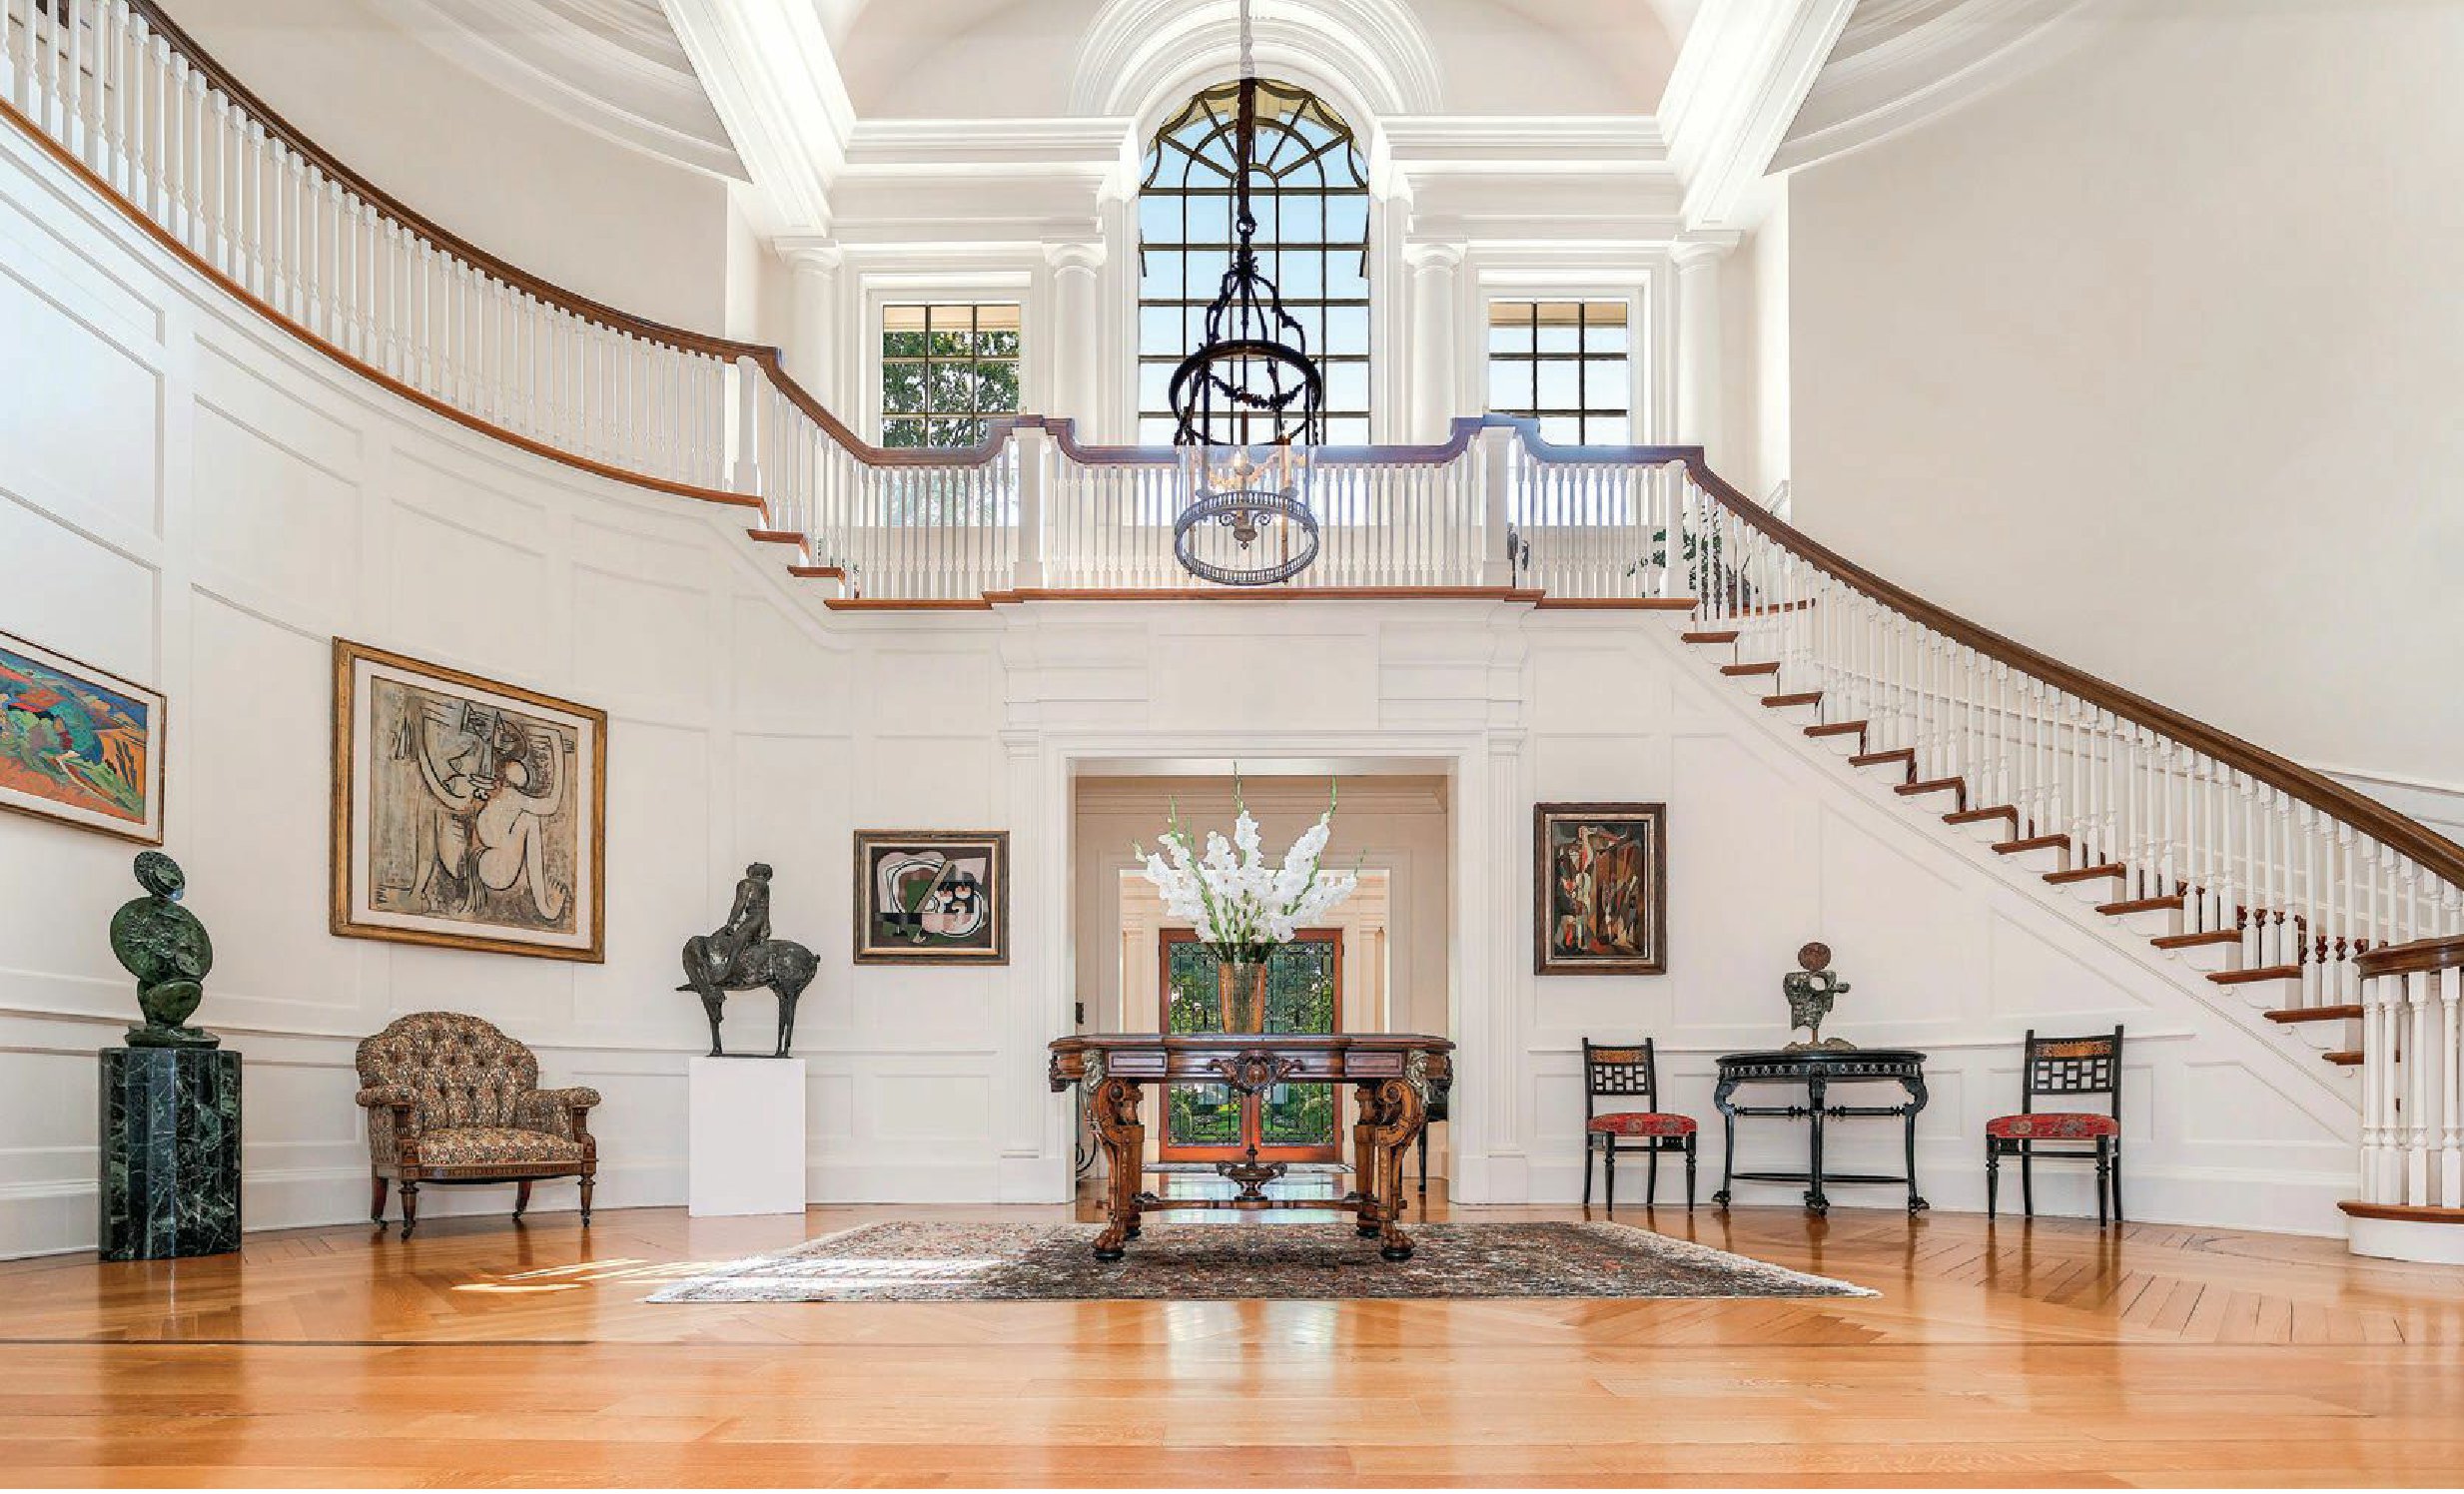 The commanding great stair hall PHOTO BY MIKE AGHACHI/LUXQUE MEDIA